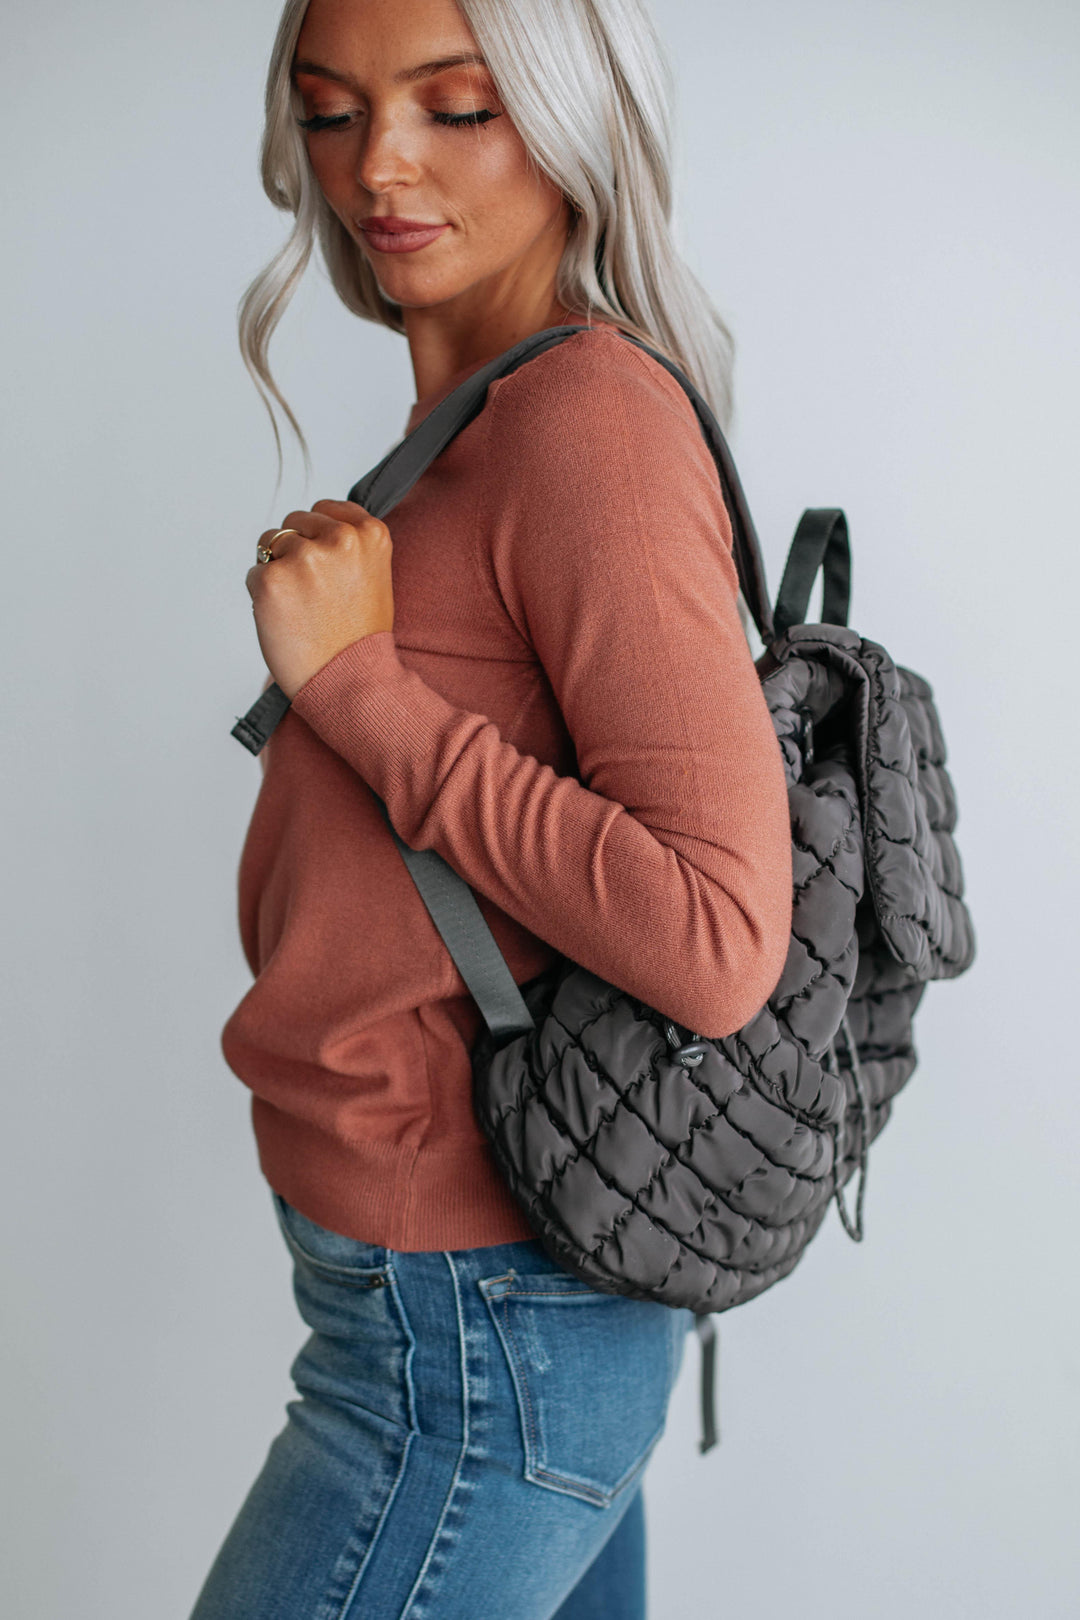 Not So Basic Quilted Backpack - Carbon